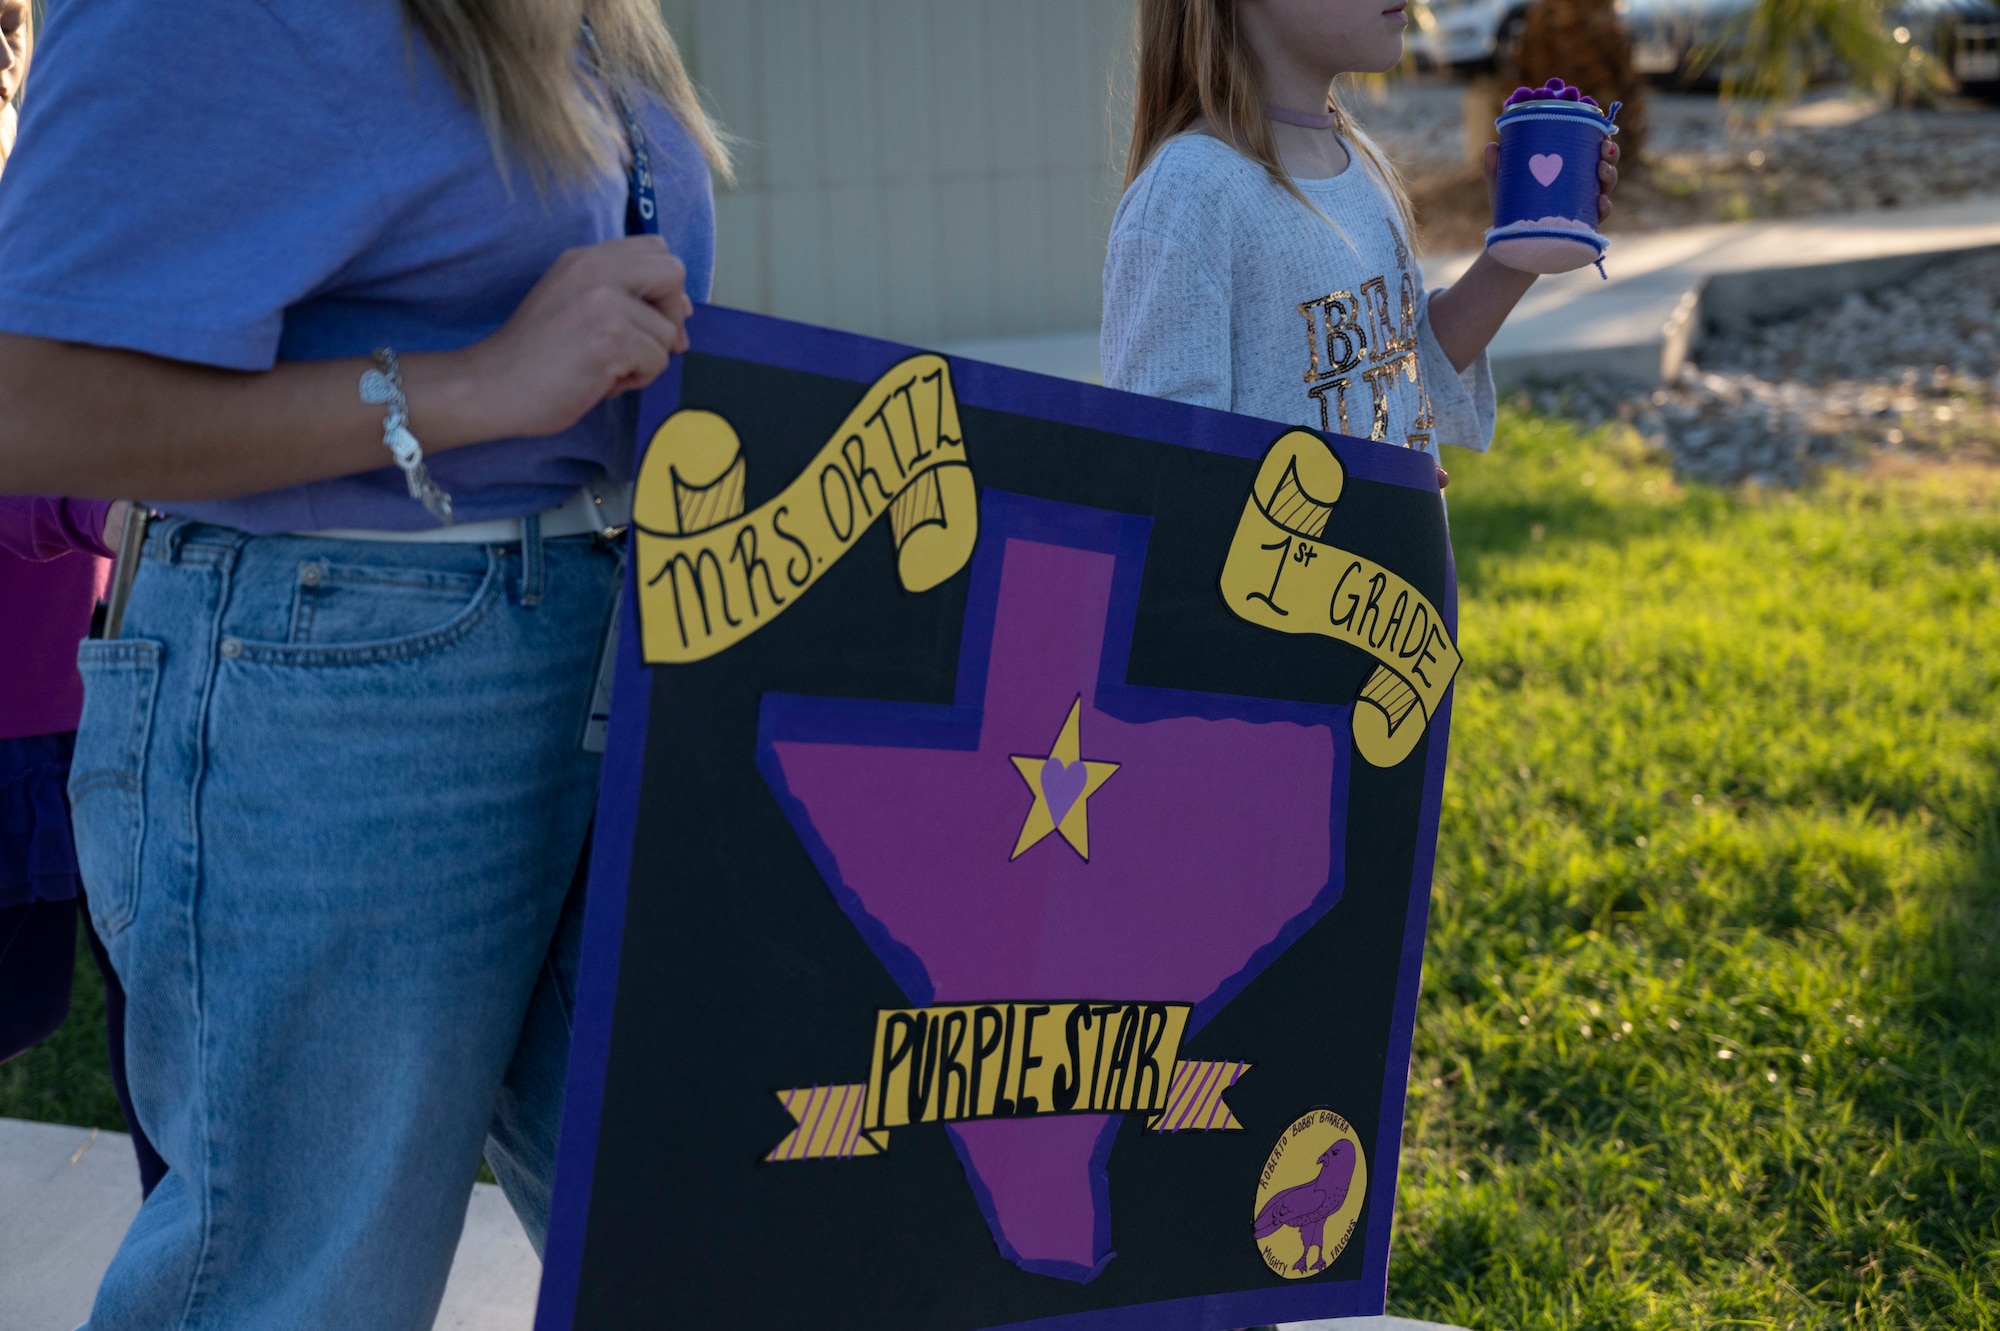 A staﬀ member and student from the Roberto Bobby Barrera (RBB) Elementary School hold up a sign during the “Purple Parade” held at Laughlin Air Force Base, Texas, Sept. 29, 2022. The “Purple Parade” was held in celebration of RBB Elementary School receiving the Purple Star Award, recognizing the support and commitment the school provides to meeting the unique needs of military-connected students and their families. (U.S. Air Force photo by Airman 1st Class Kailee Reynolds)